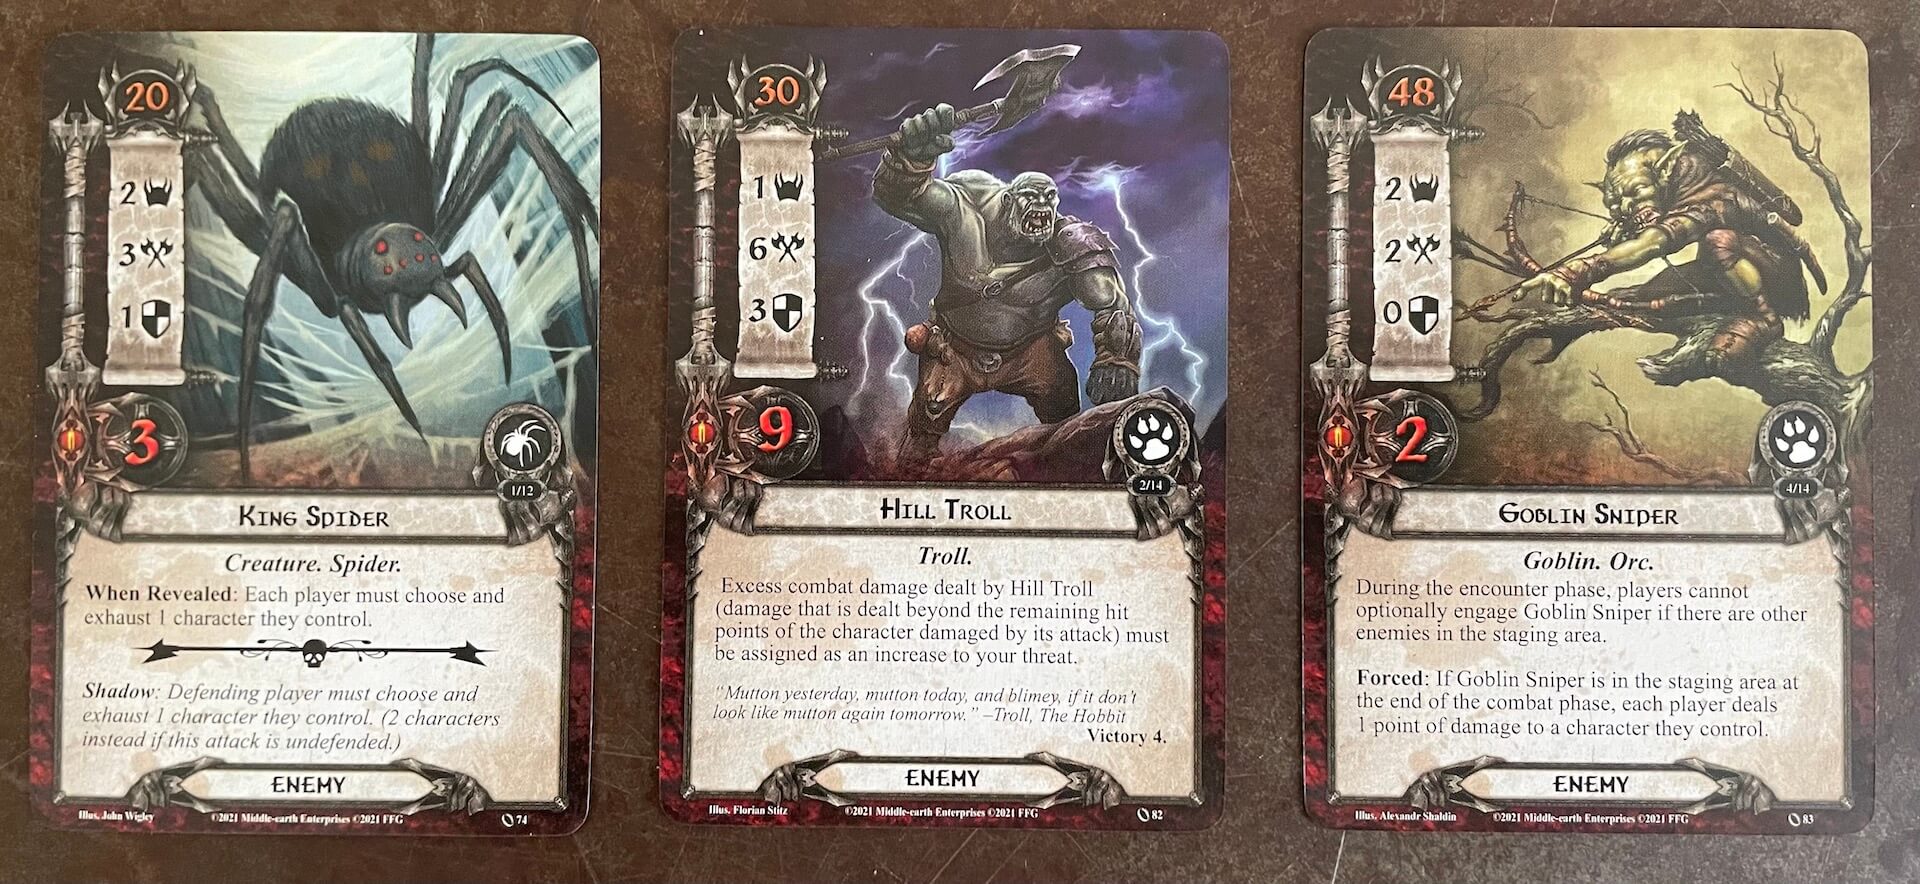 Enemies you'll face in Lord of the Rings Card Game